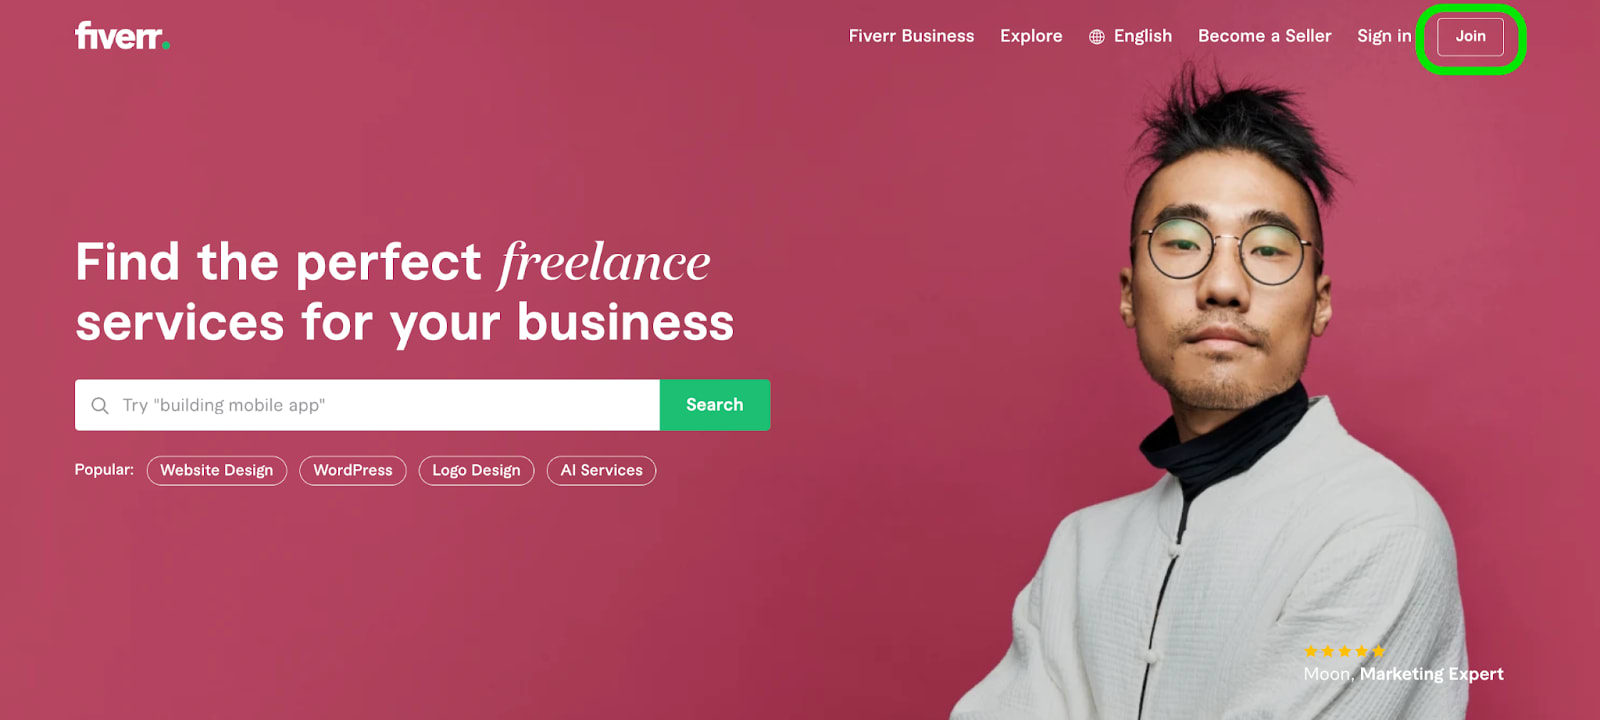 Fiverr Business signup Join